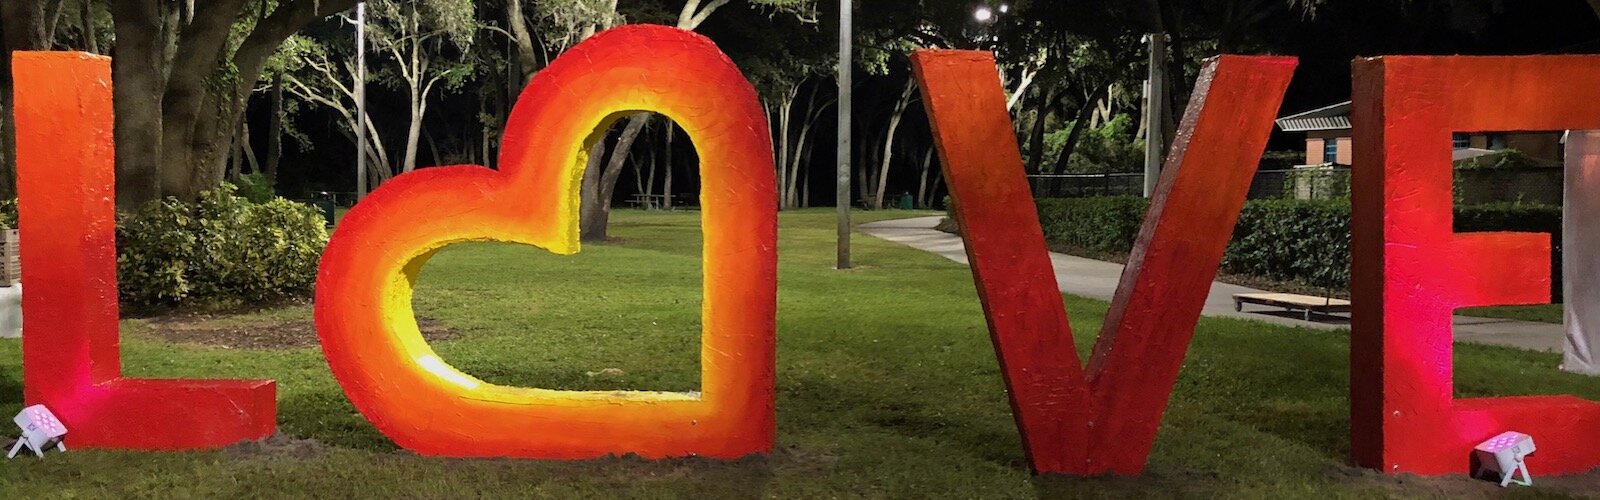 Love sculpture for Harvest Hope Park by Lead Artist Junior Polo was funded by a Treasure Tampa grant by the Gobioff Foundation.